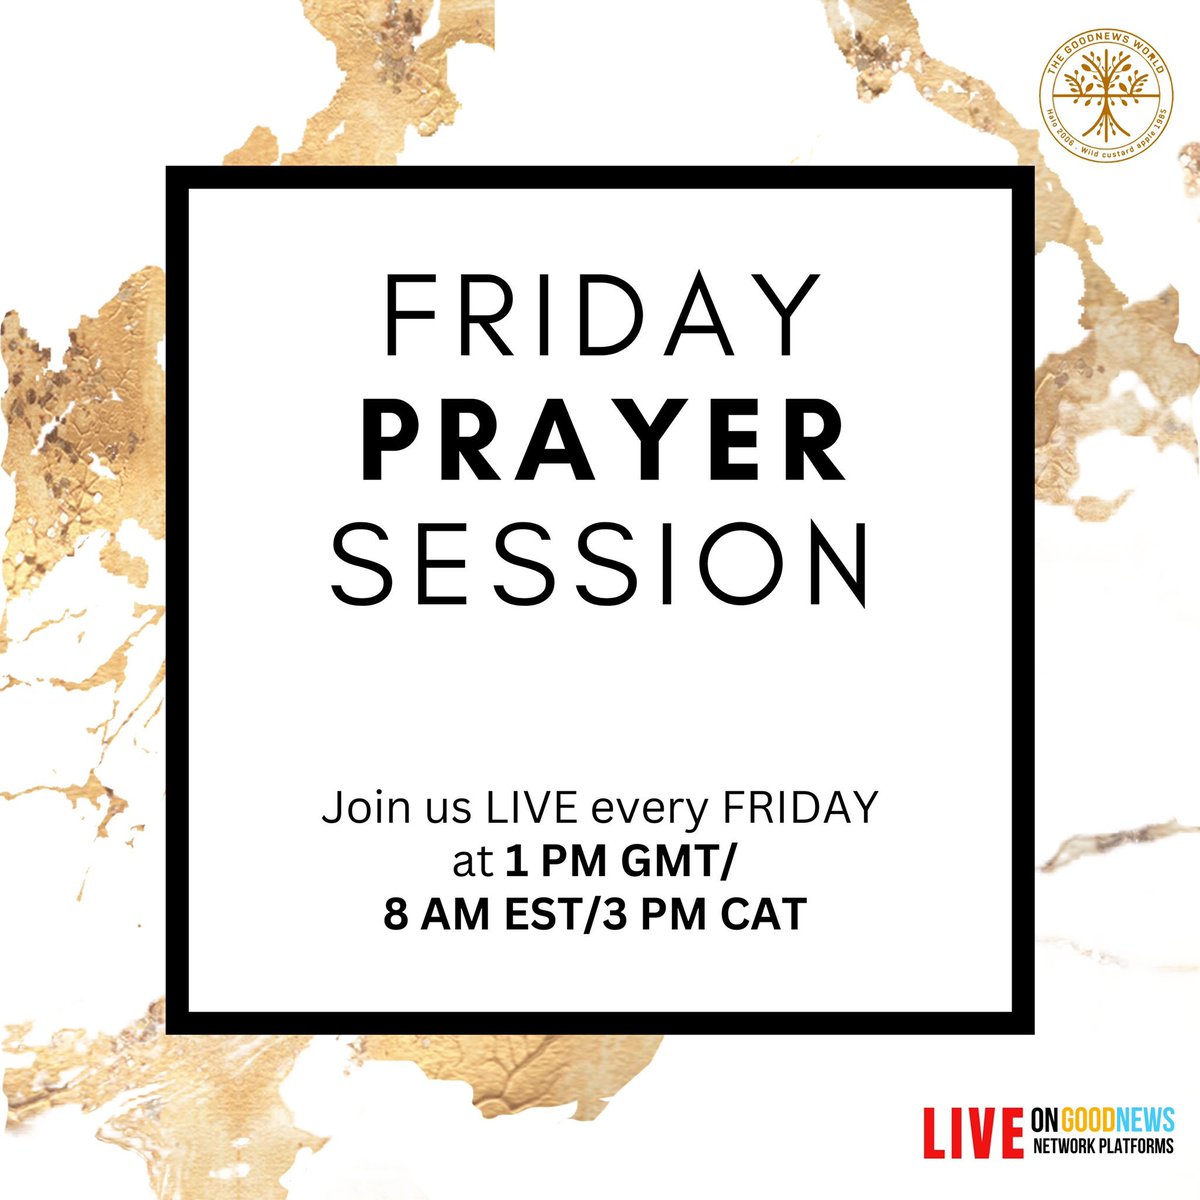 Tune in for the Friday Prayer Session live at 1pm GMT across the GoodNewsWorld TV Network, as we declare and decree the will of God over nations. #prayer #pray #Jesus #goodnews #uebertangel